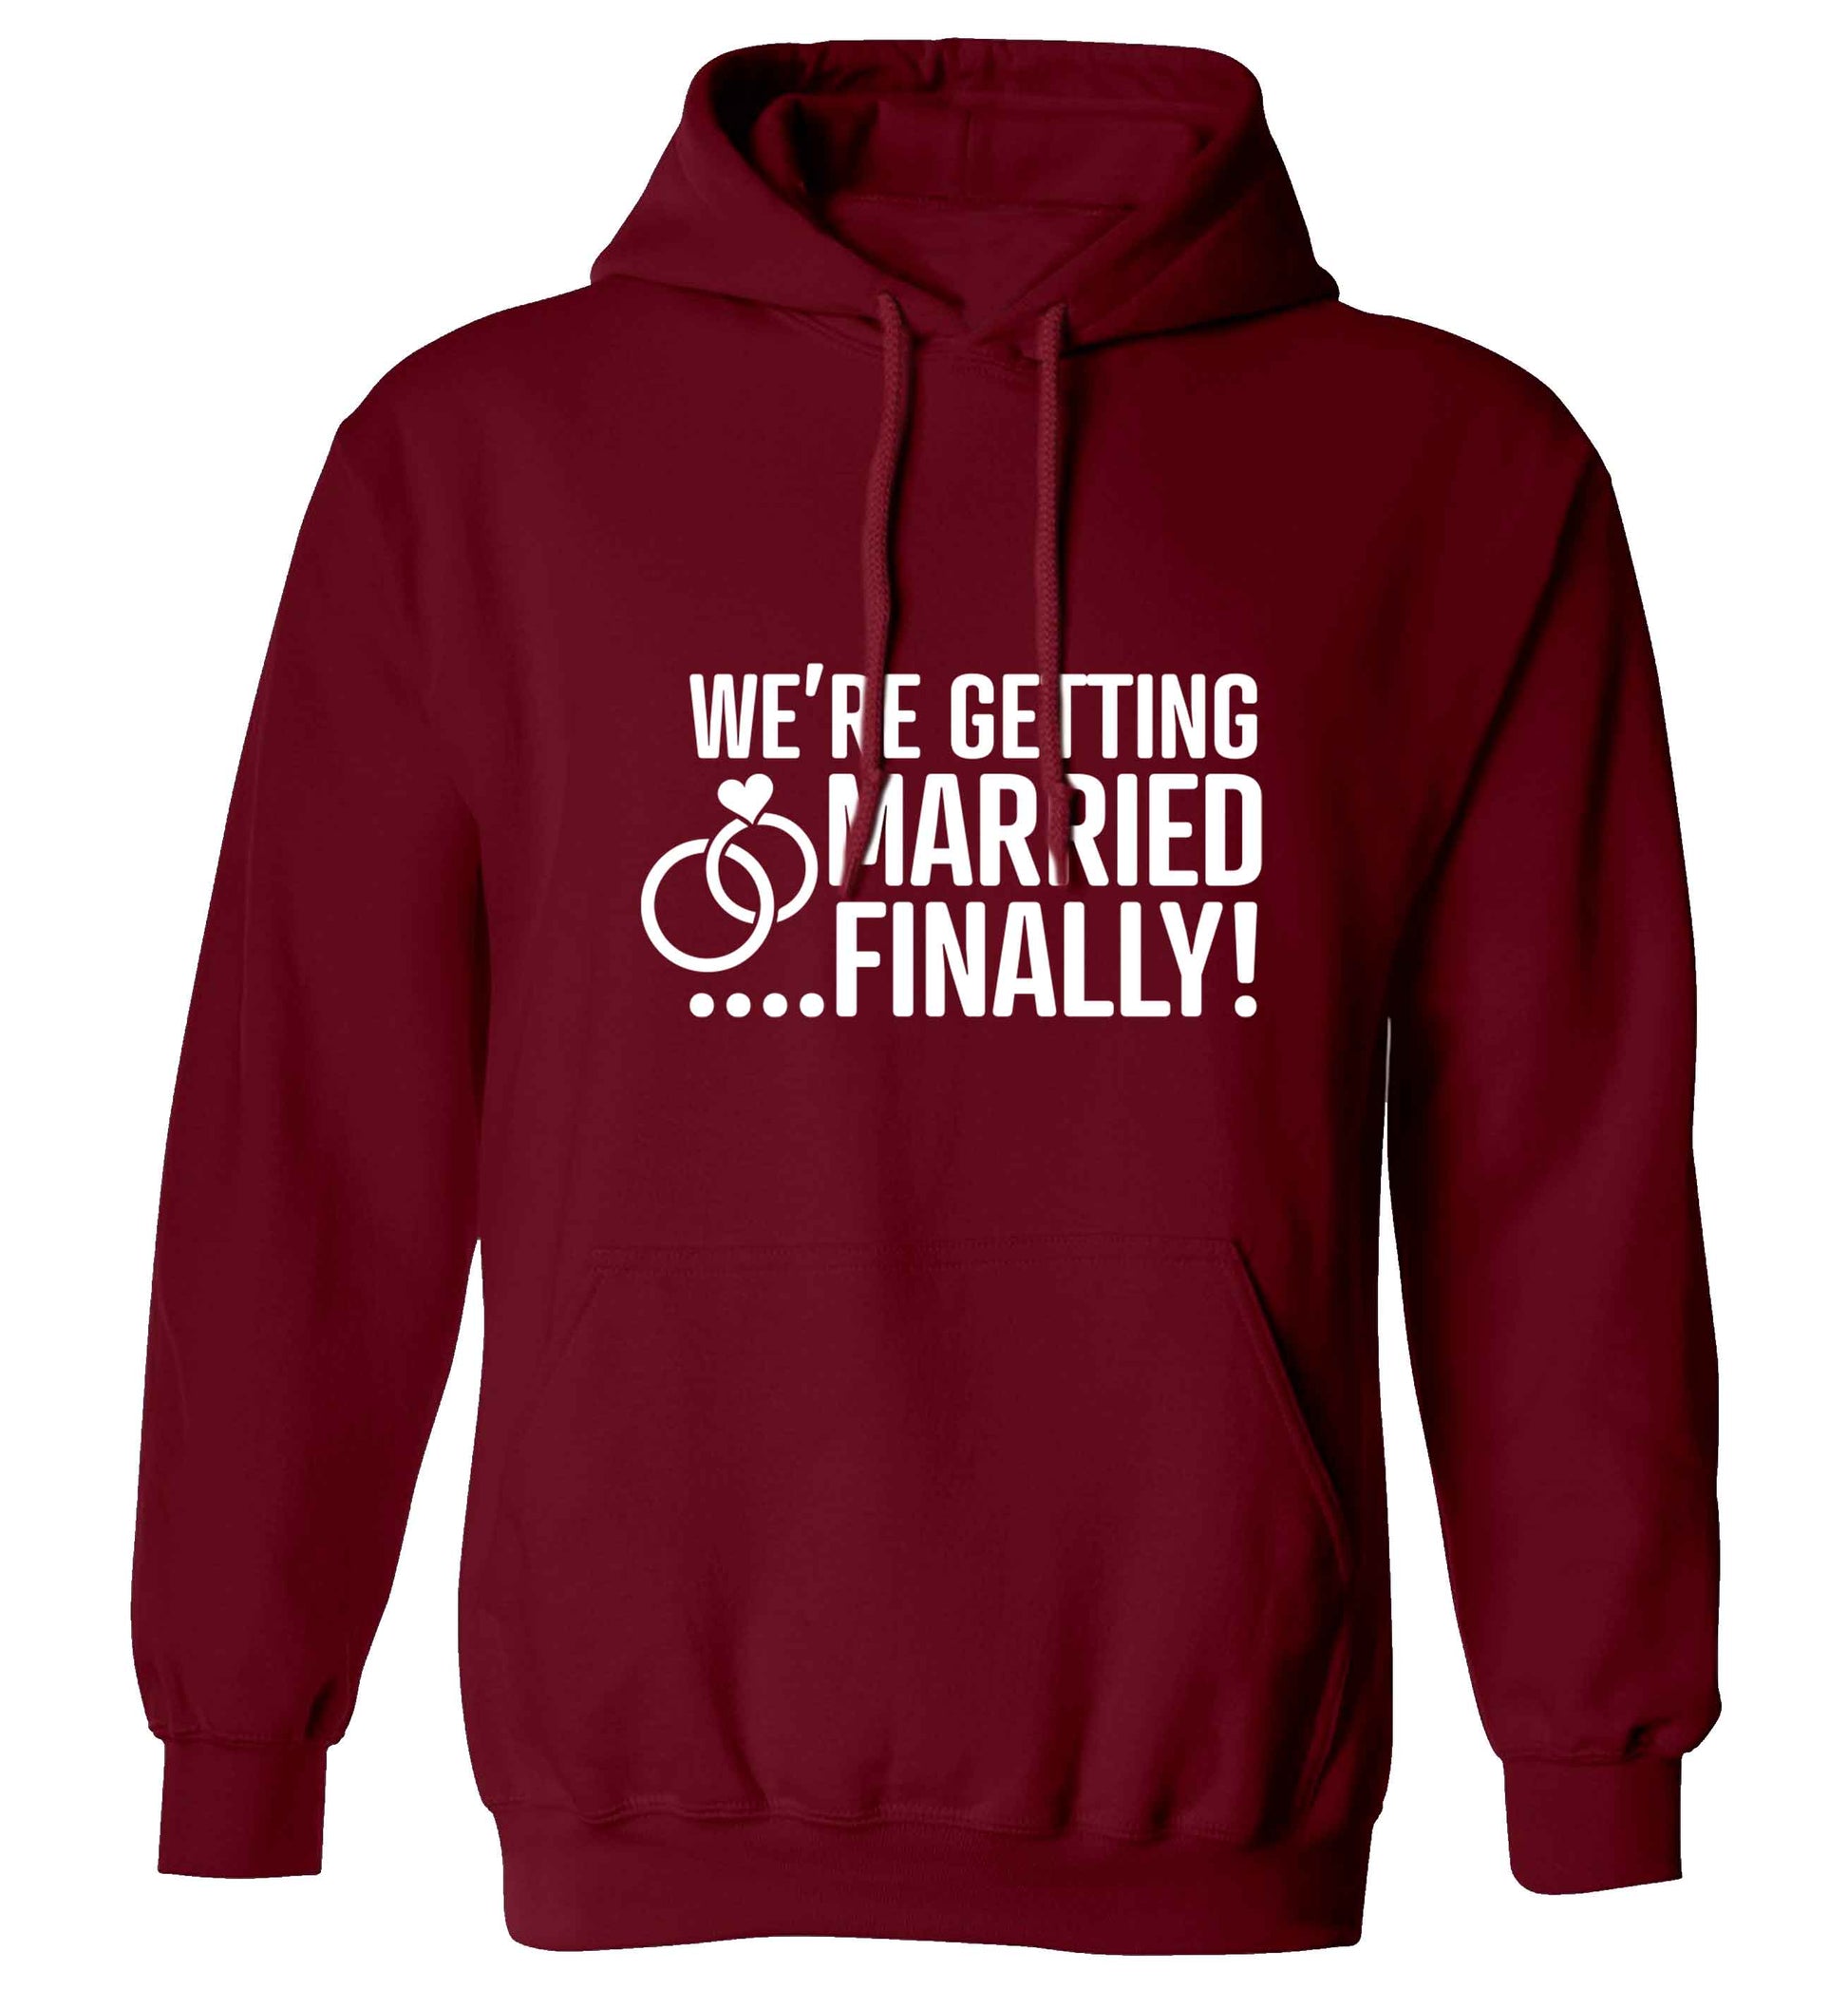 It's been a long wait but it's finally happening! Let everyone know you're celebrating your big day soon! adults unisex maroon hoodie 2XL